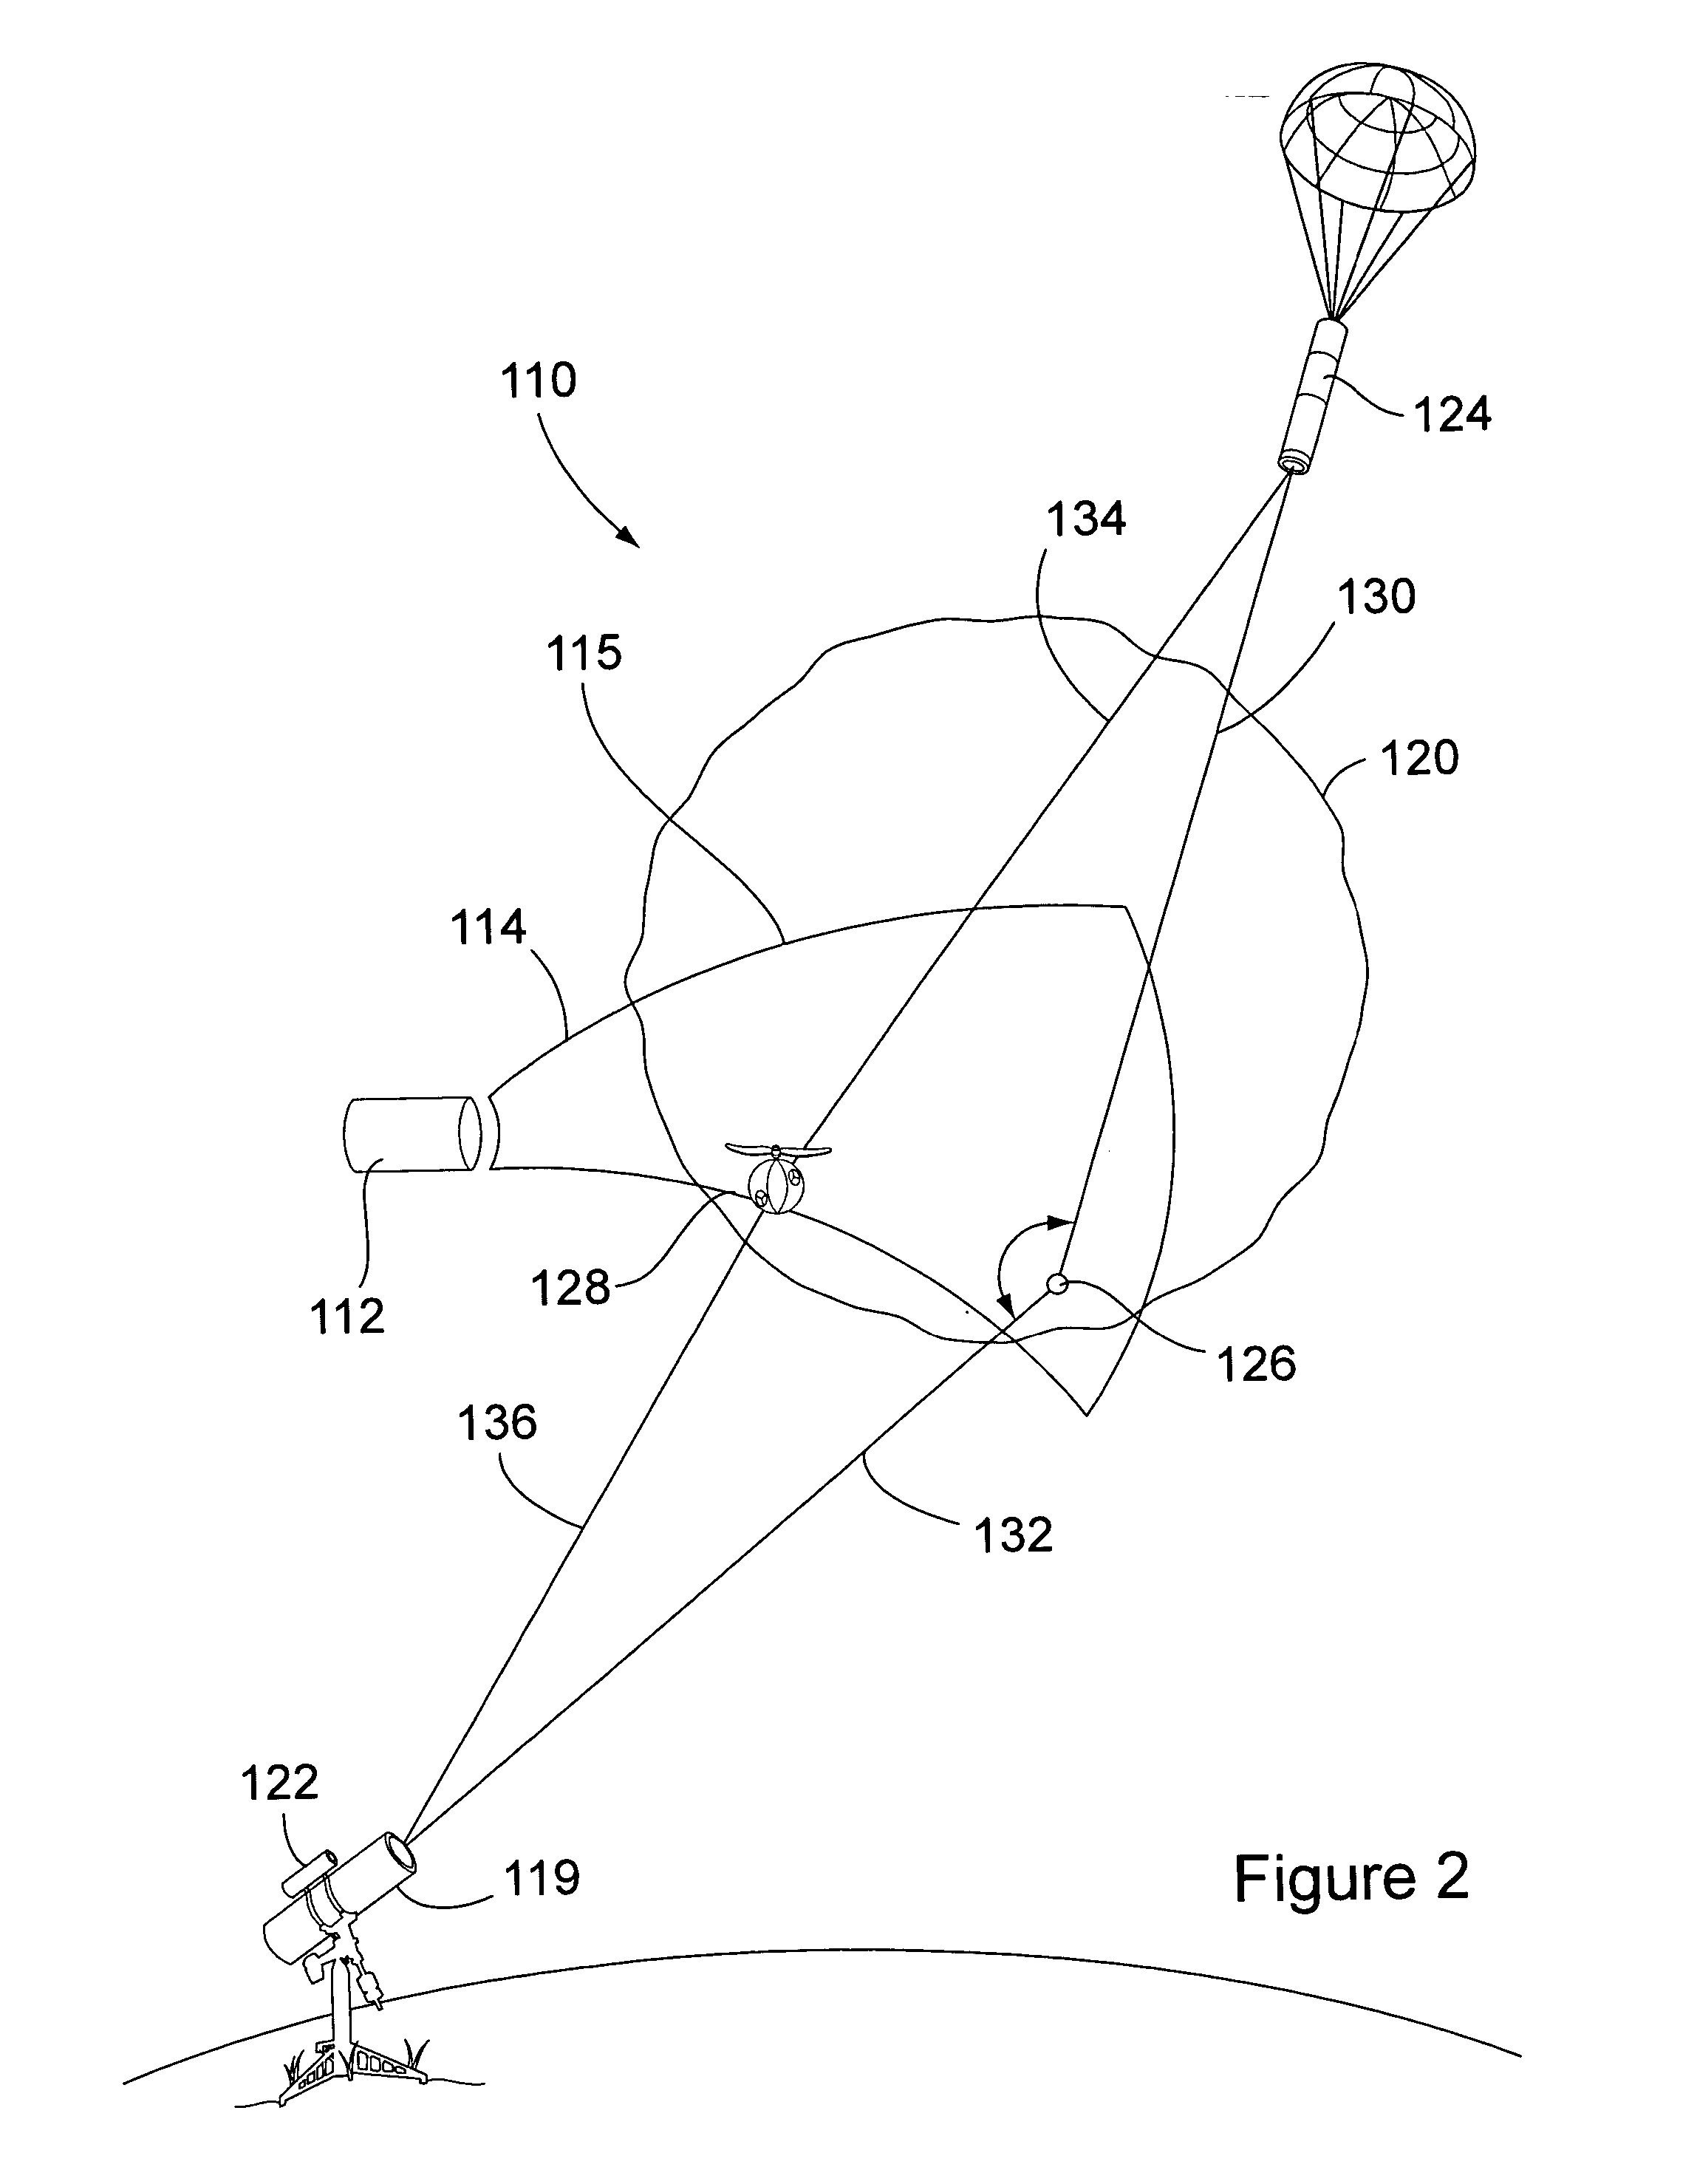 Co-deployed optical referencing for responsive dust-based sensing system